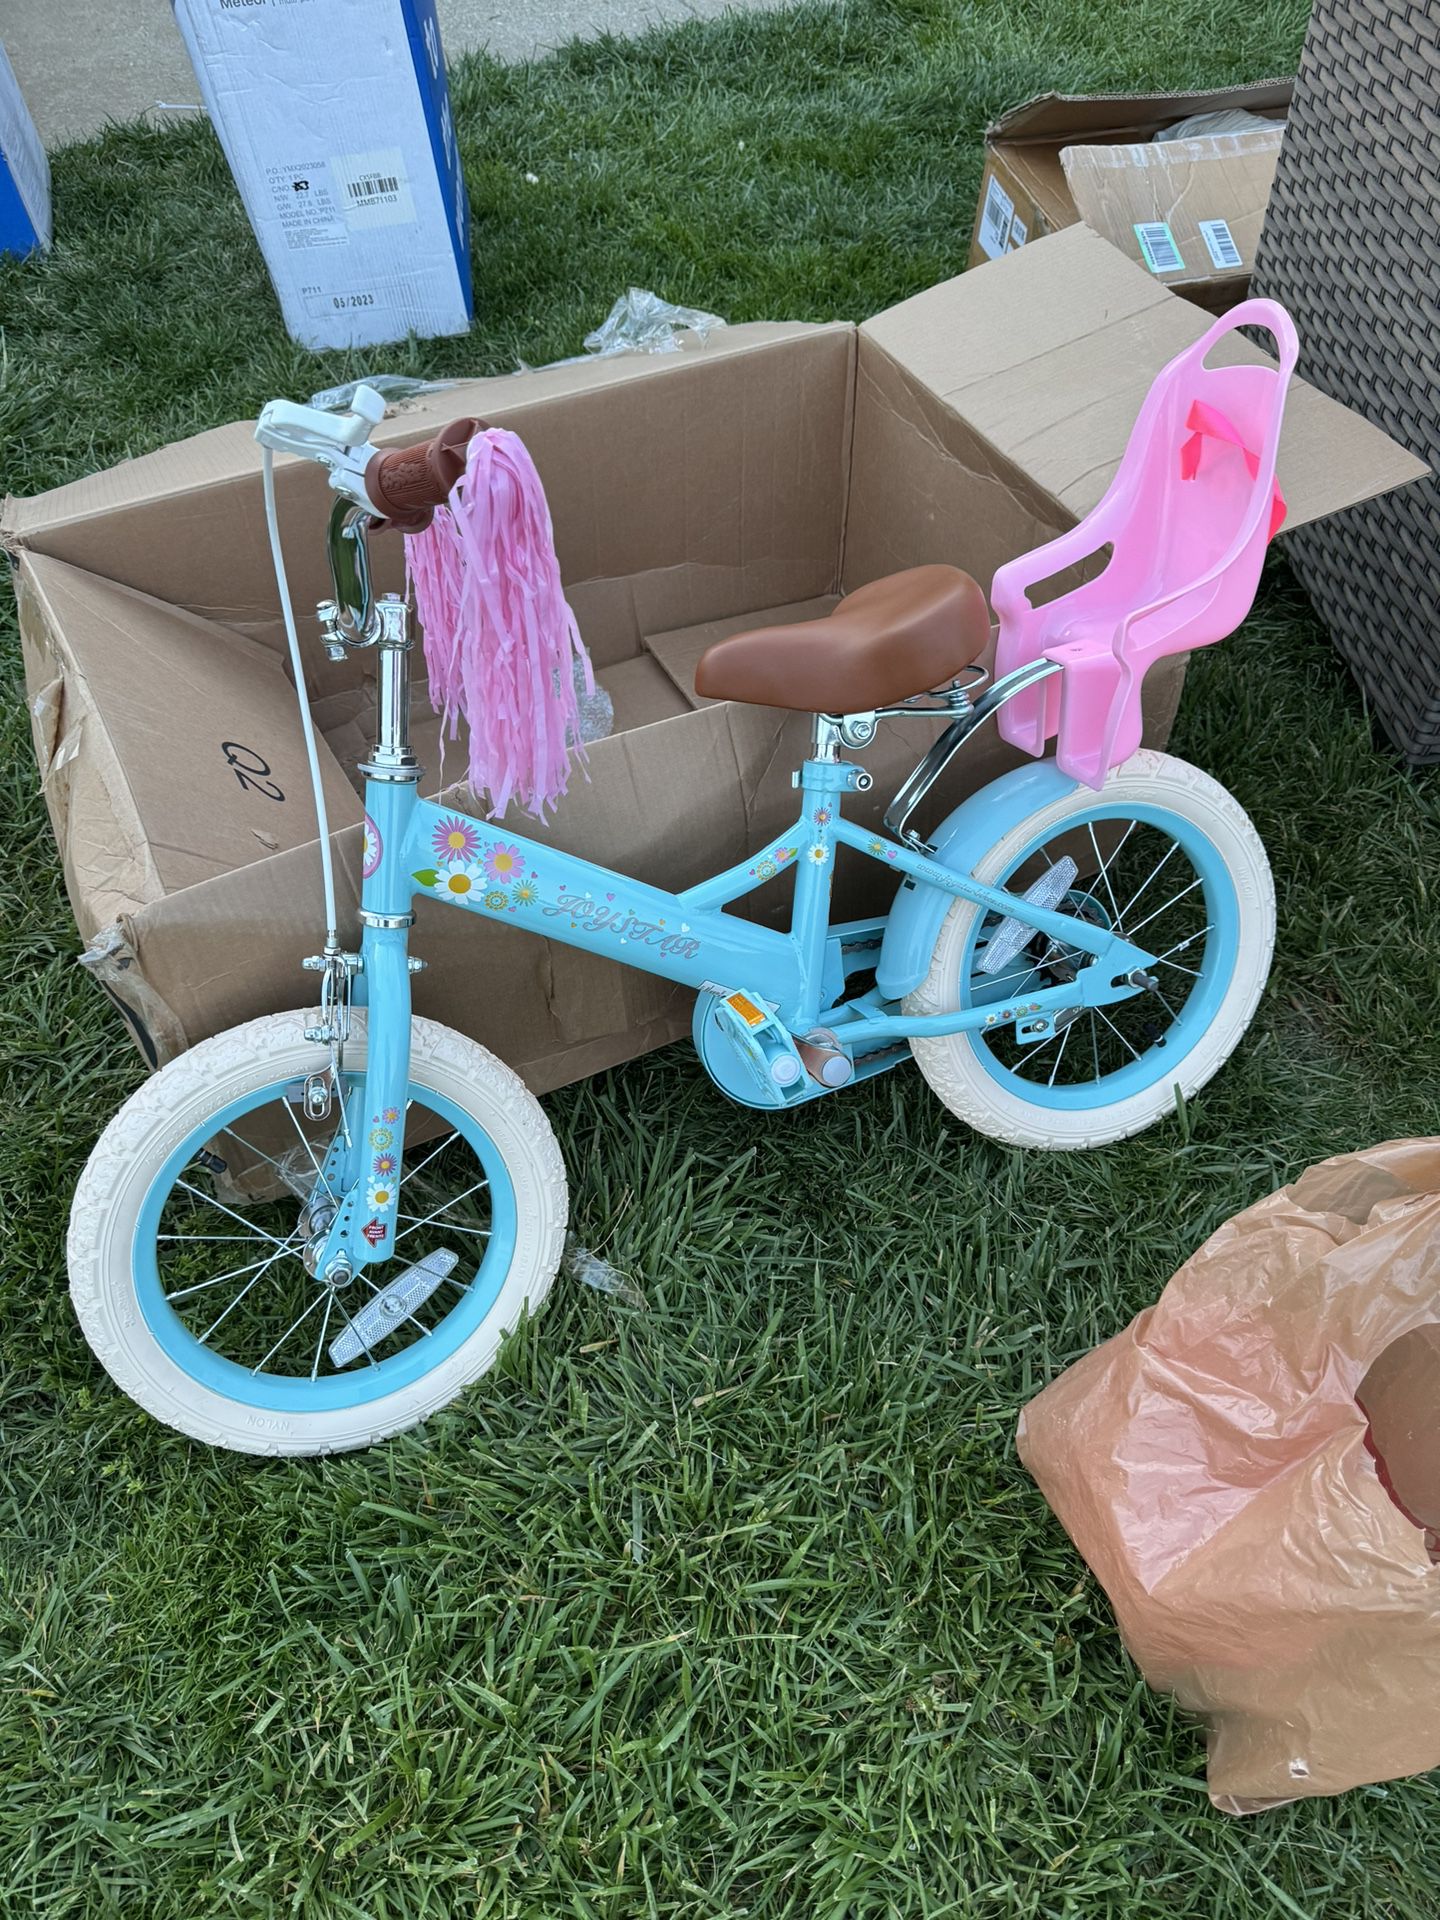 JOYSTAR Little Daisy Kids Bike for Girls Ages 14 Inch Princess Girls Bicycle with Doll Bike Seat, Training Wheels, Basket and Str